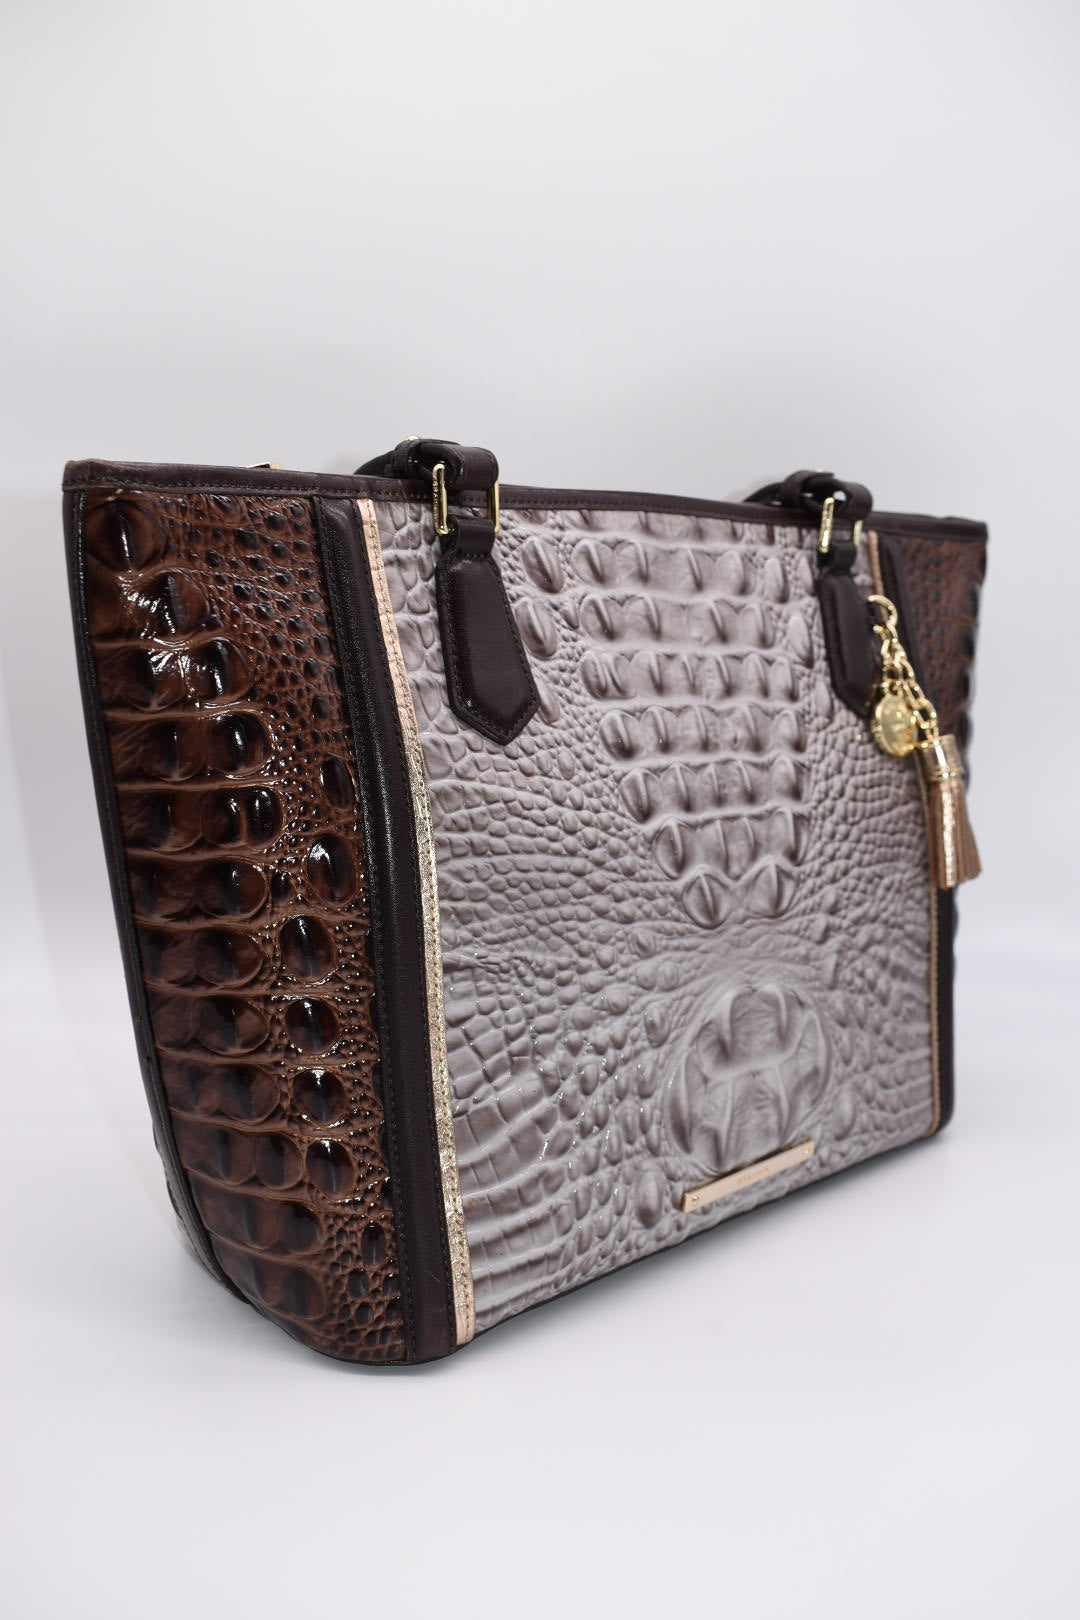 Brahmin Medium Asher Tote Bag in Quill Greco